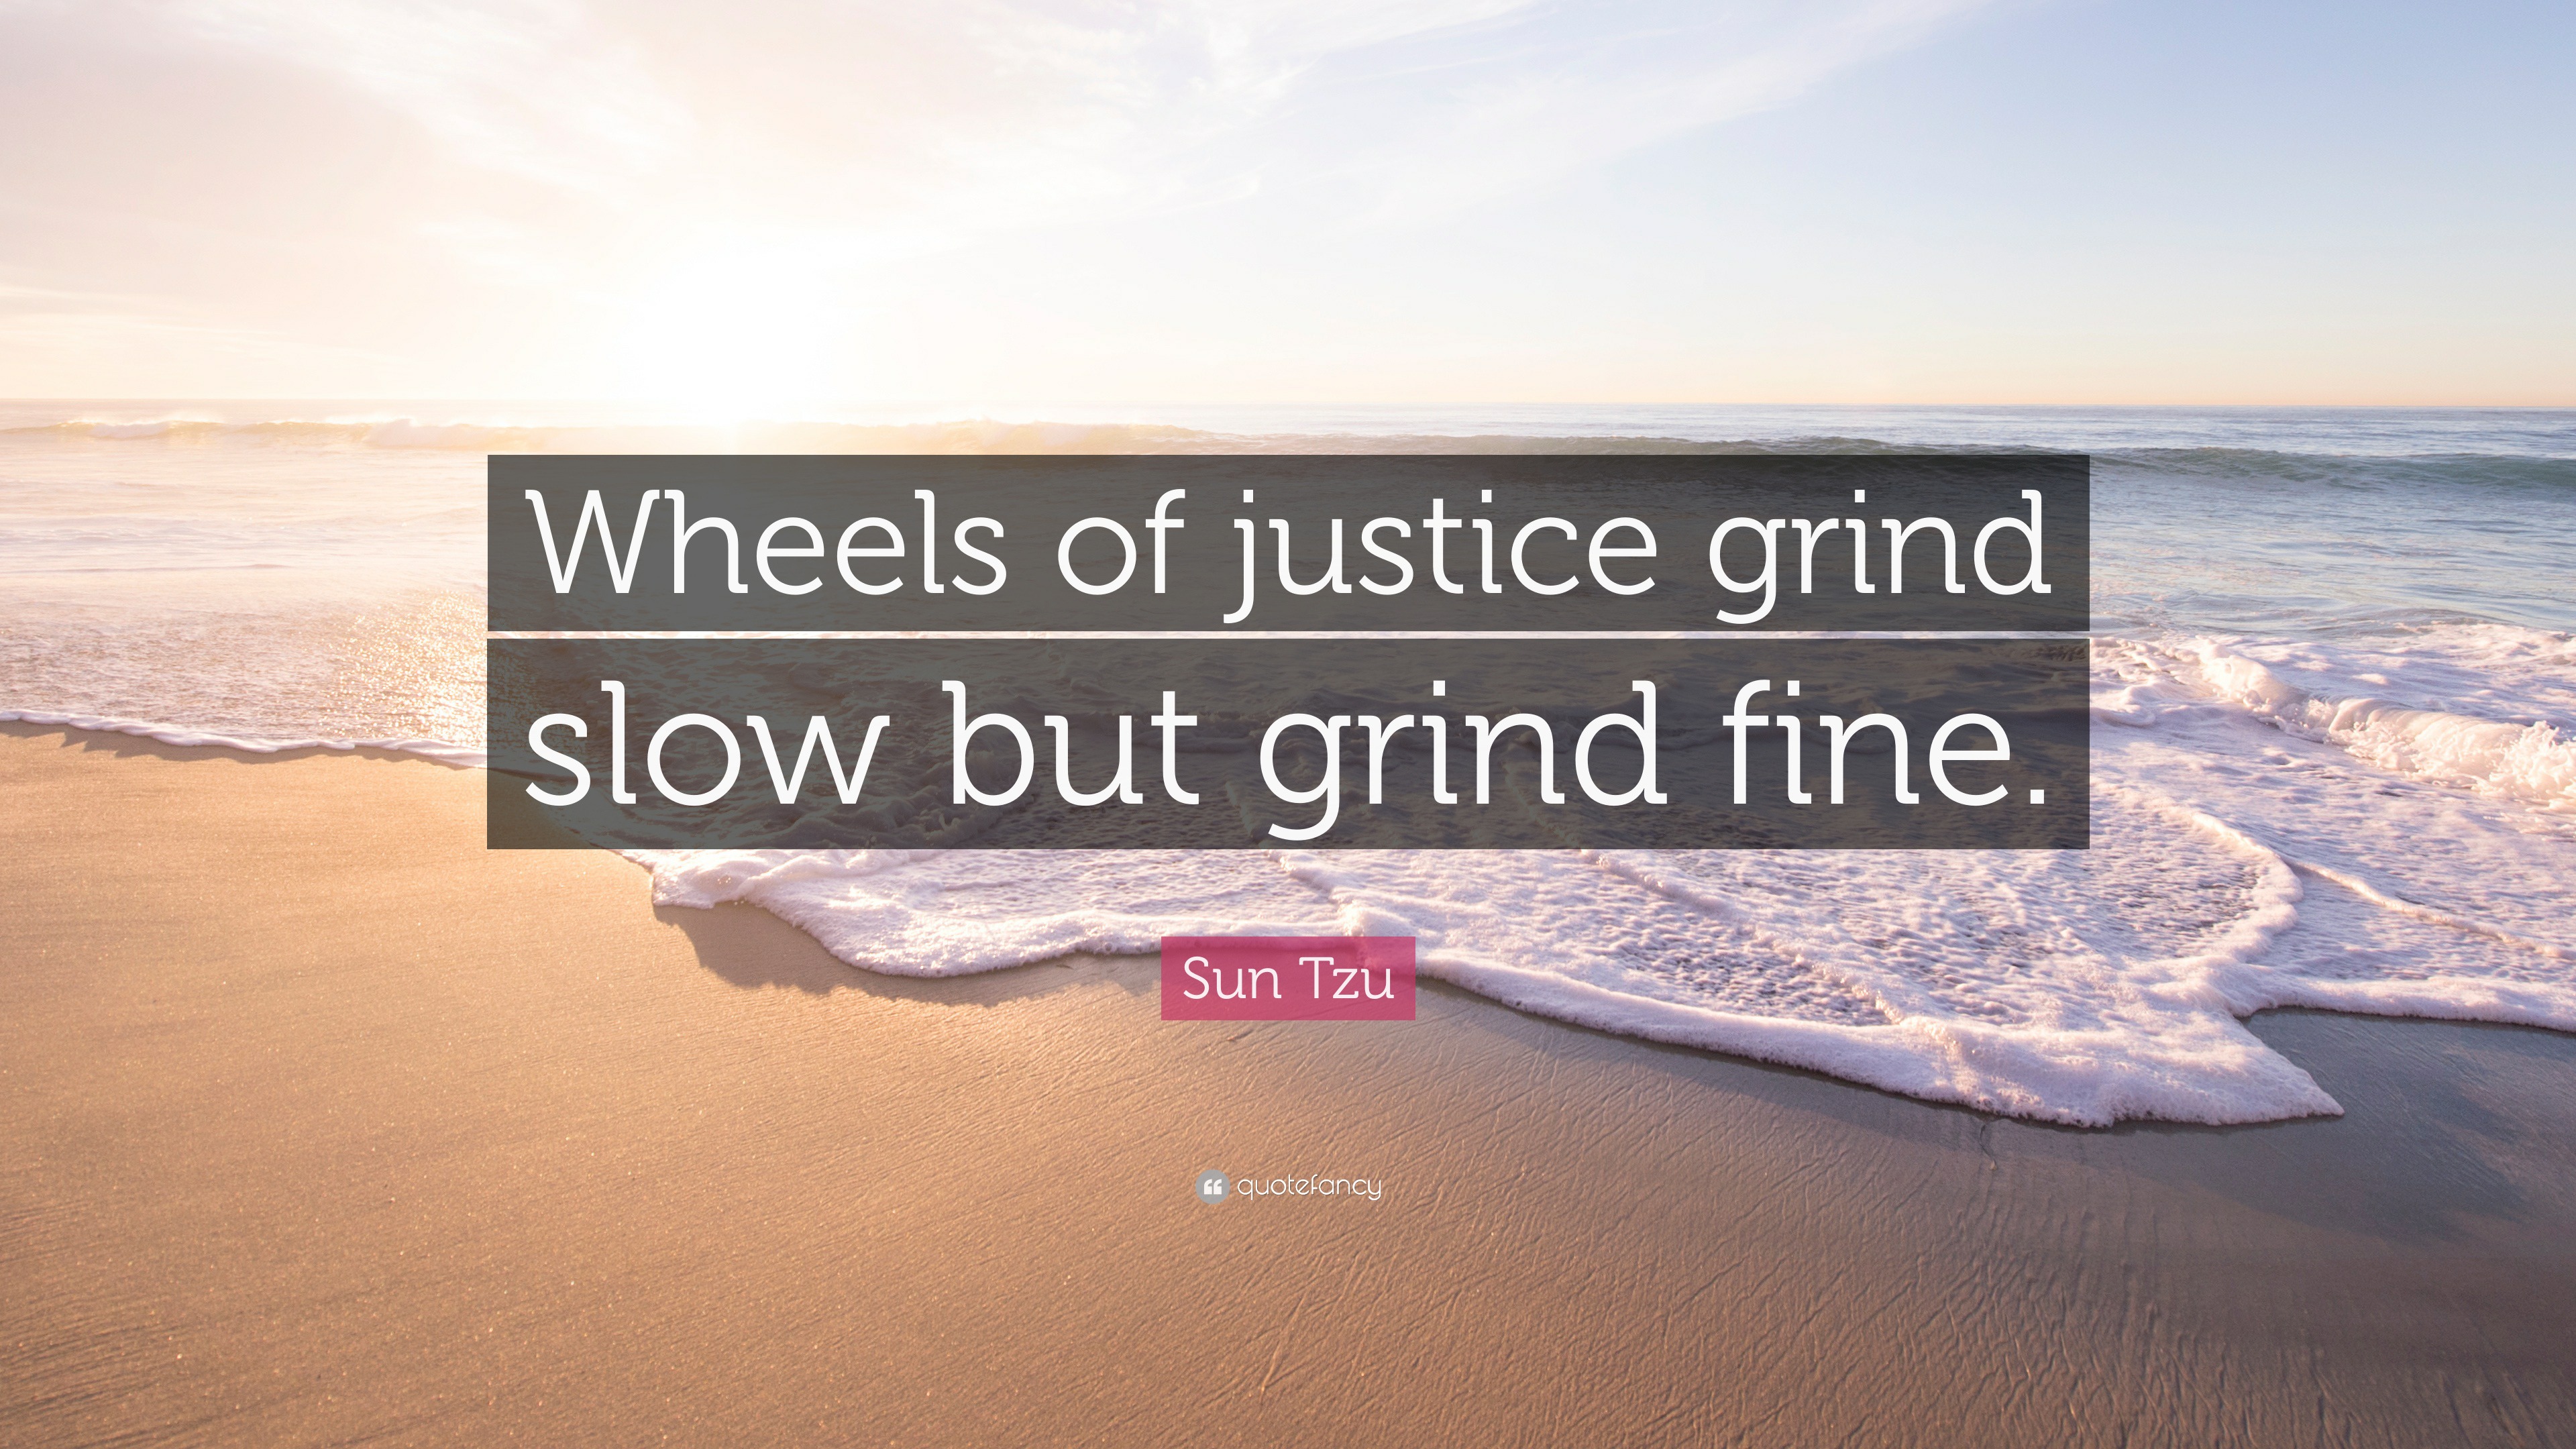 Wheels of justice turning too slowly for loved ones